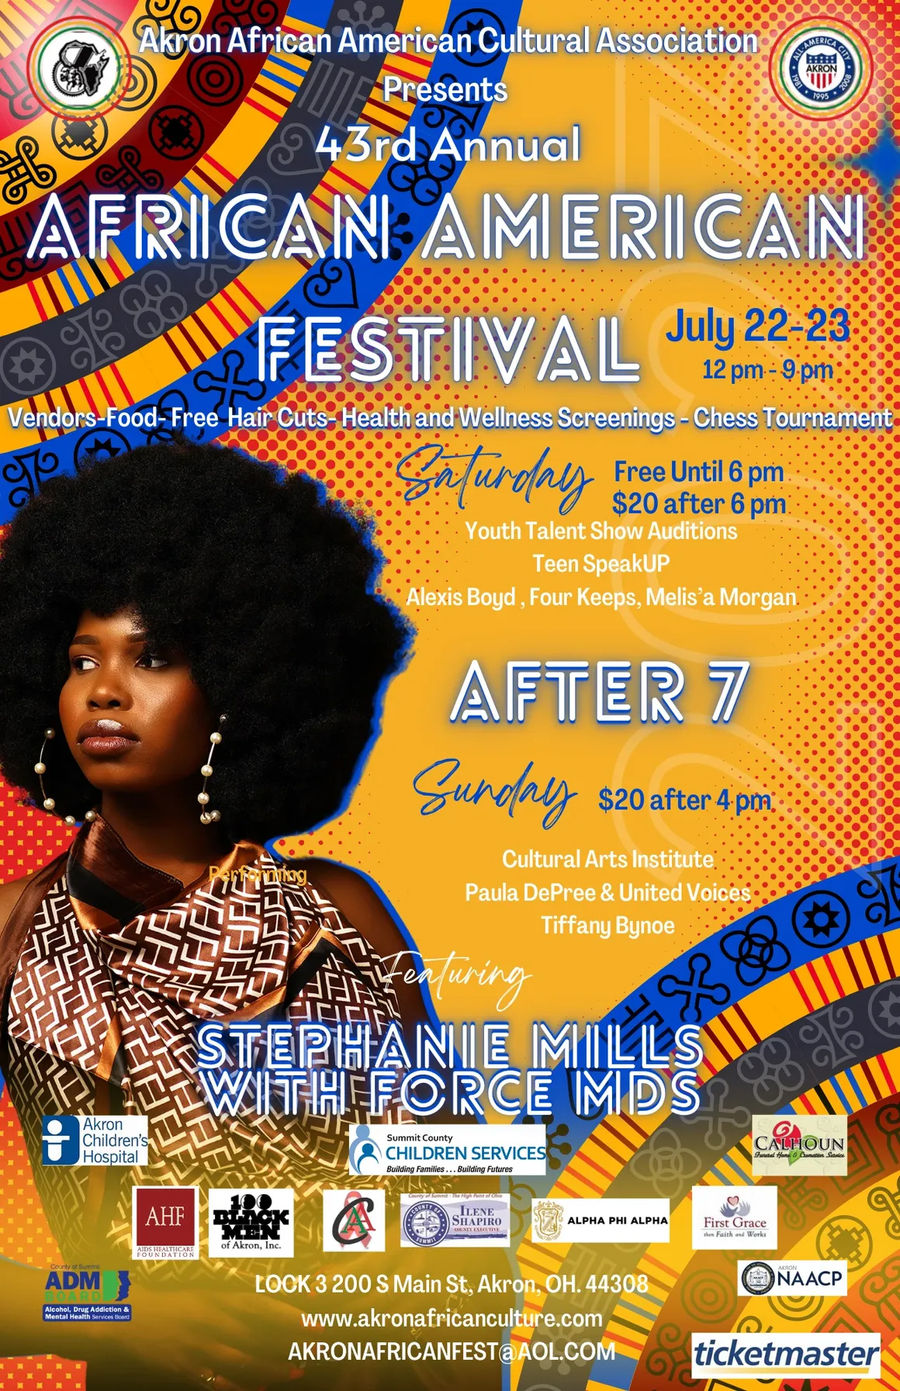 African American Cultural Festival Downtown Akron Partnership Akron, OH